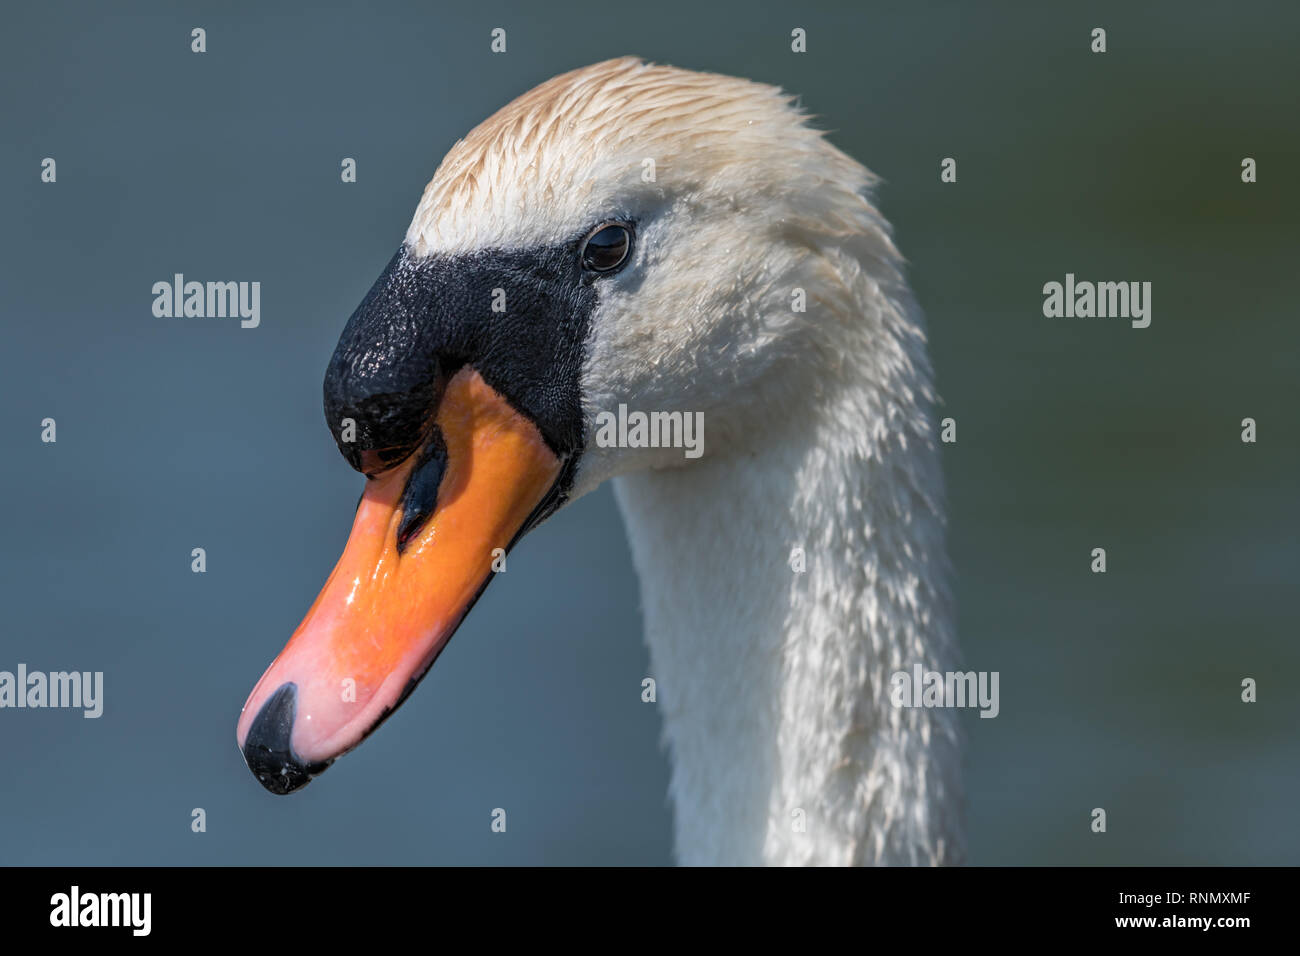 White swan close up of neck and face with a clear  background. Stock Photo